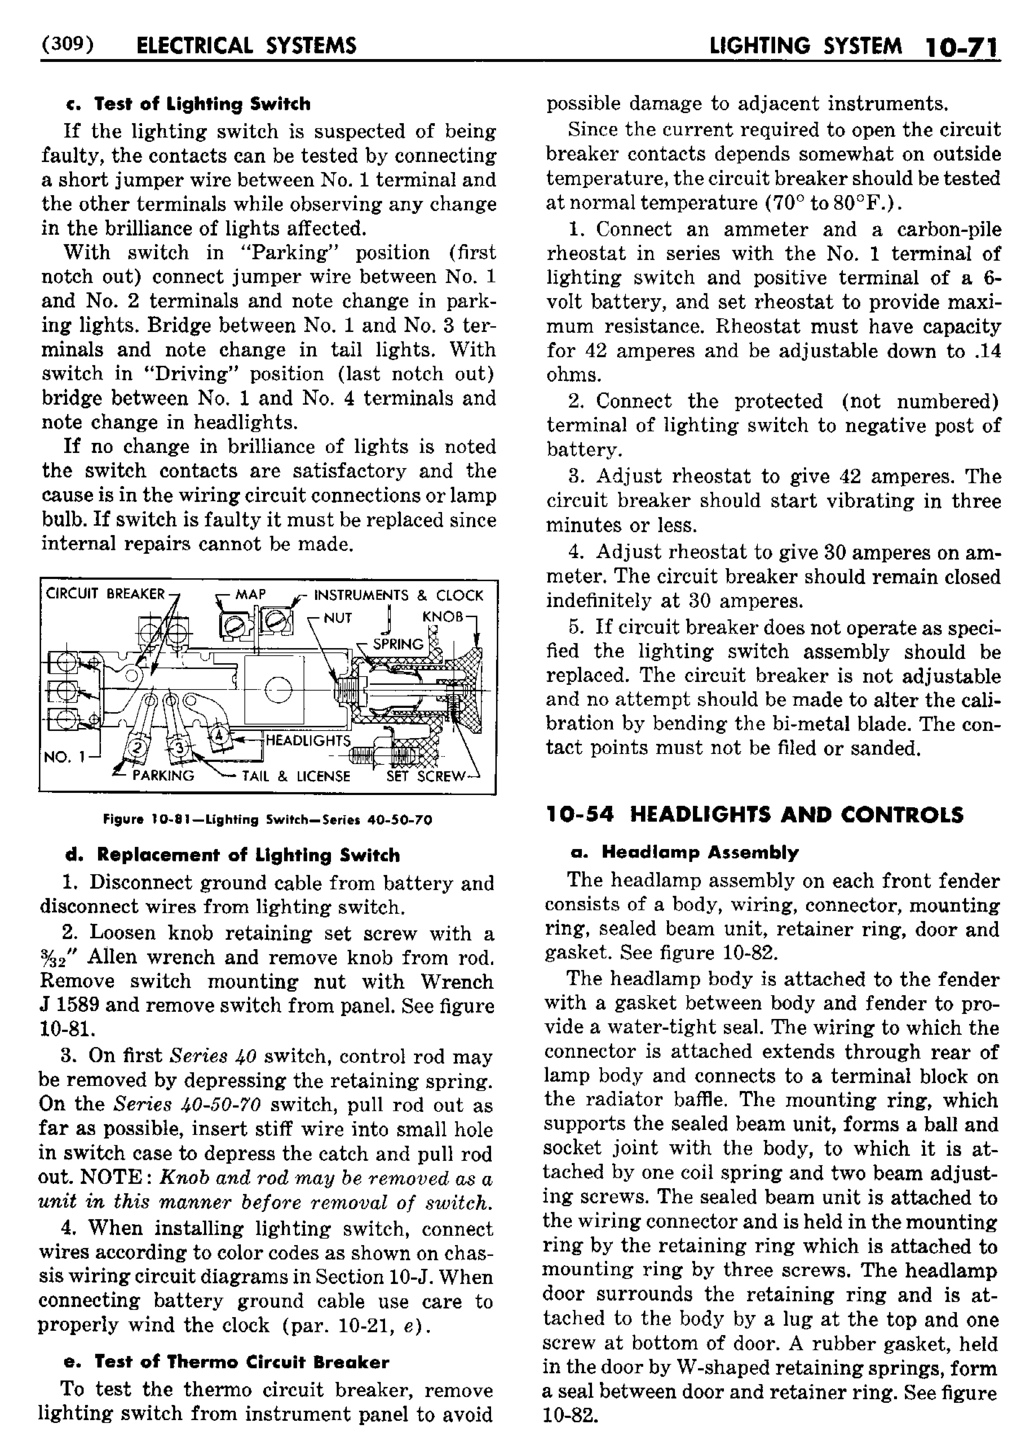 n_11 1950 Buick Shop Manual - Electrical Systems-071-071.jpg